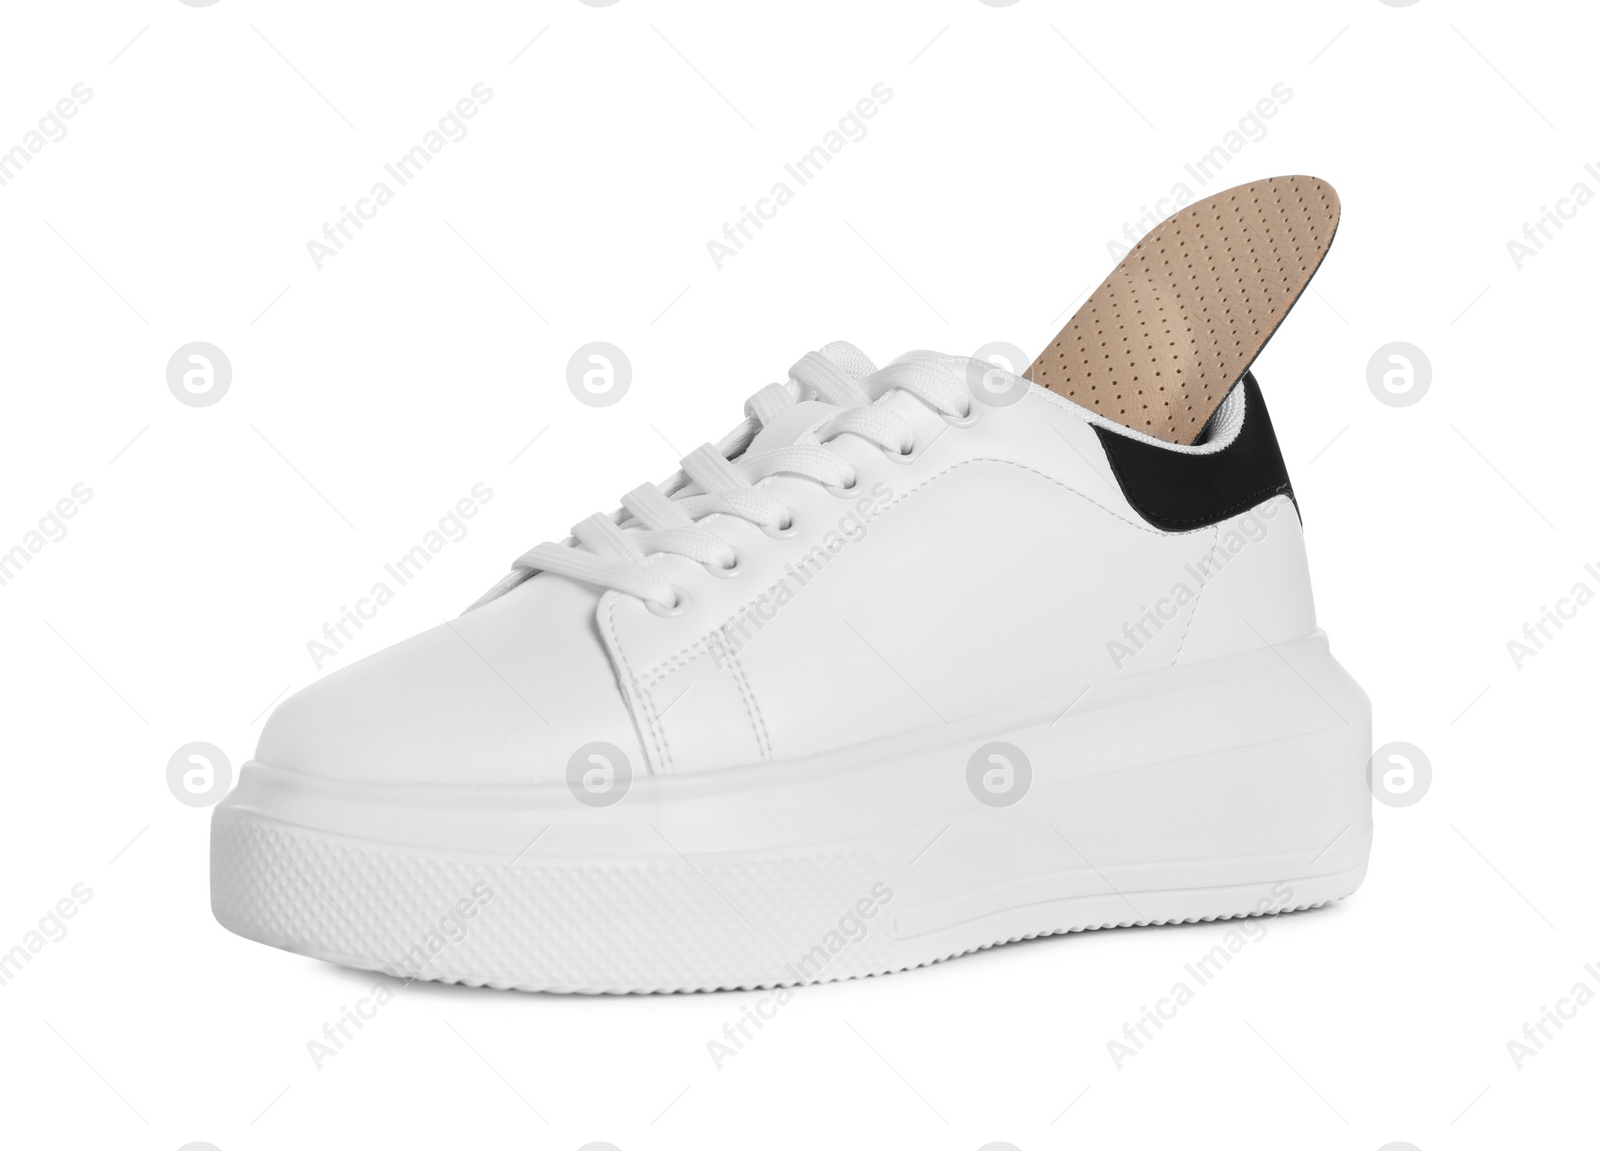 Photo of Orthopedic insole in shoe on white background